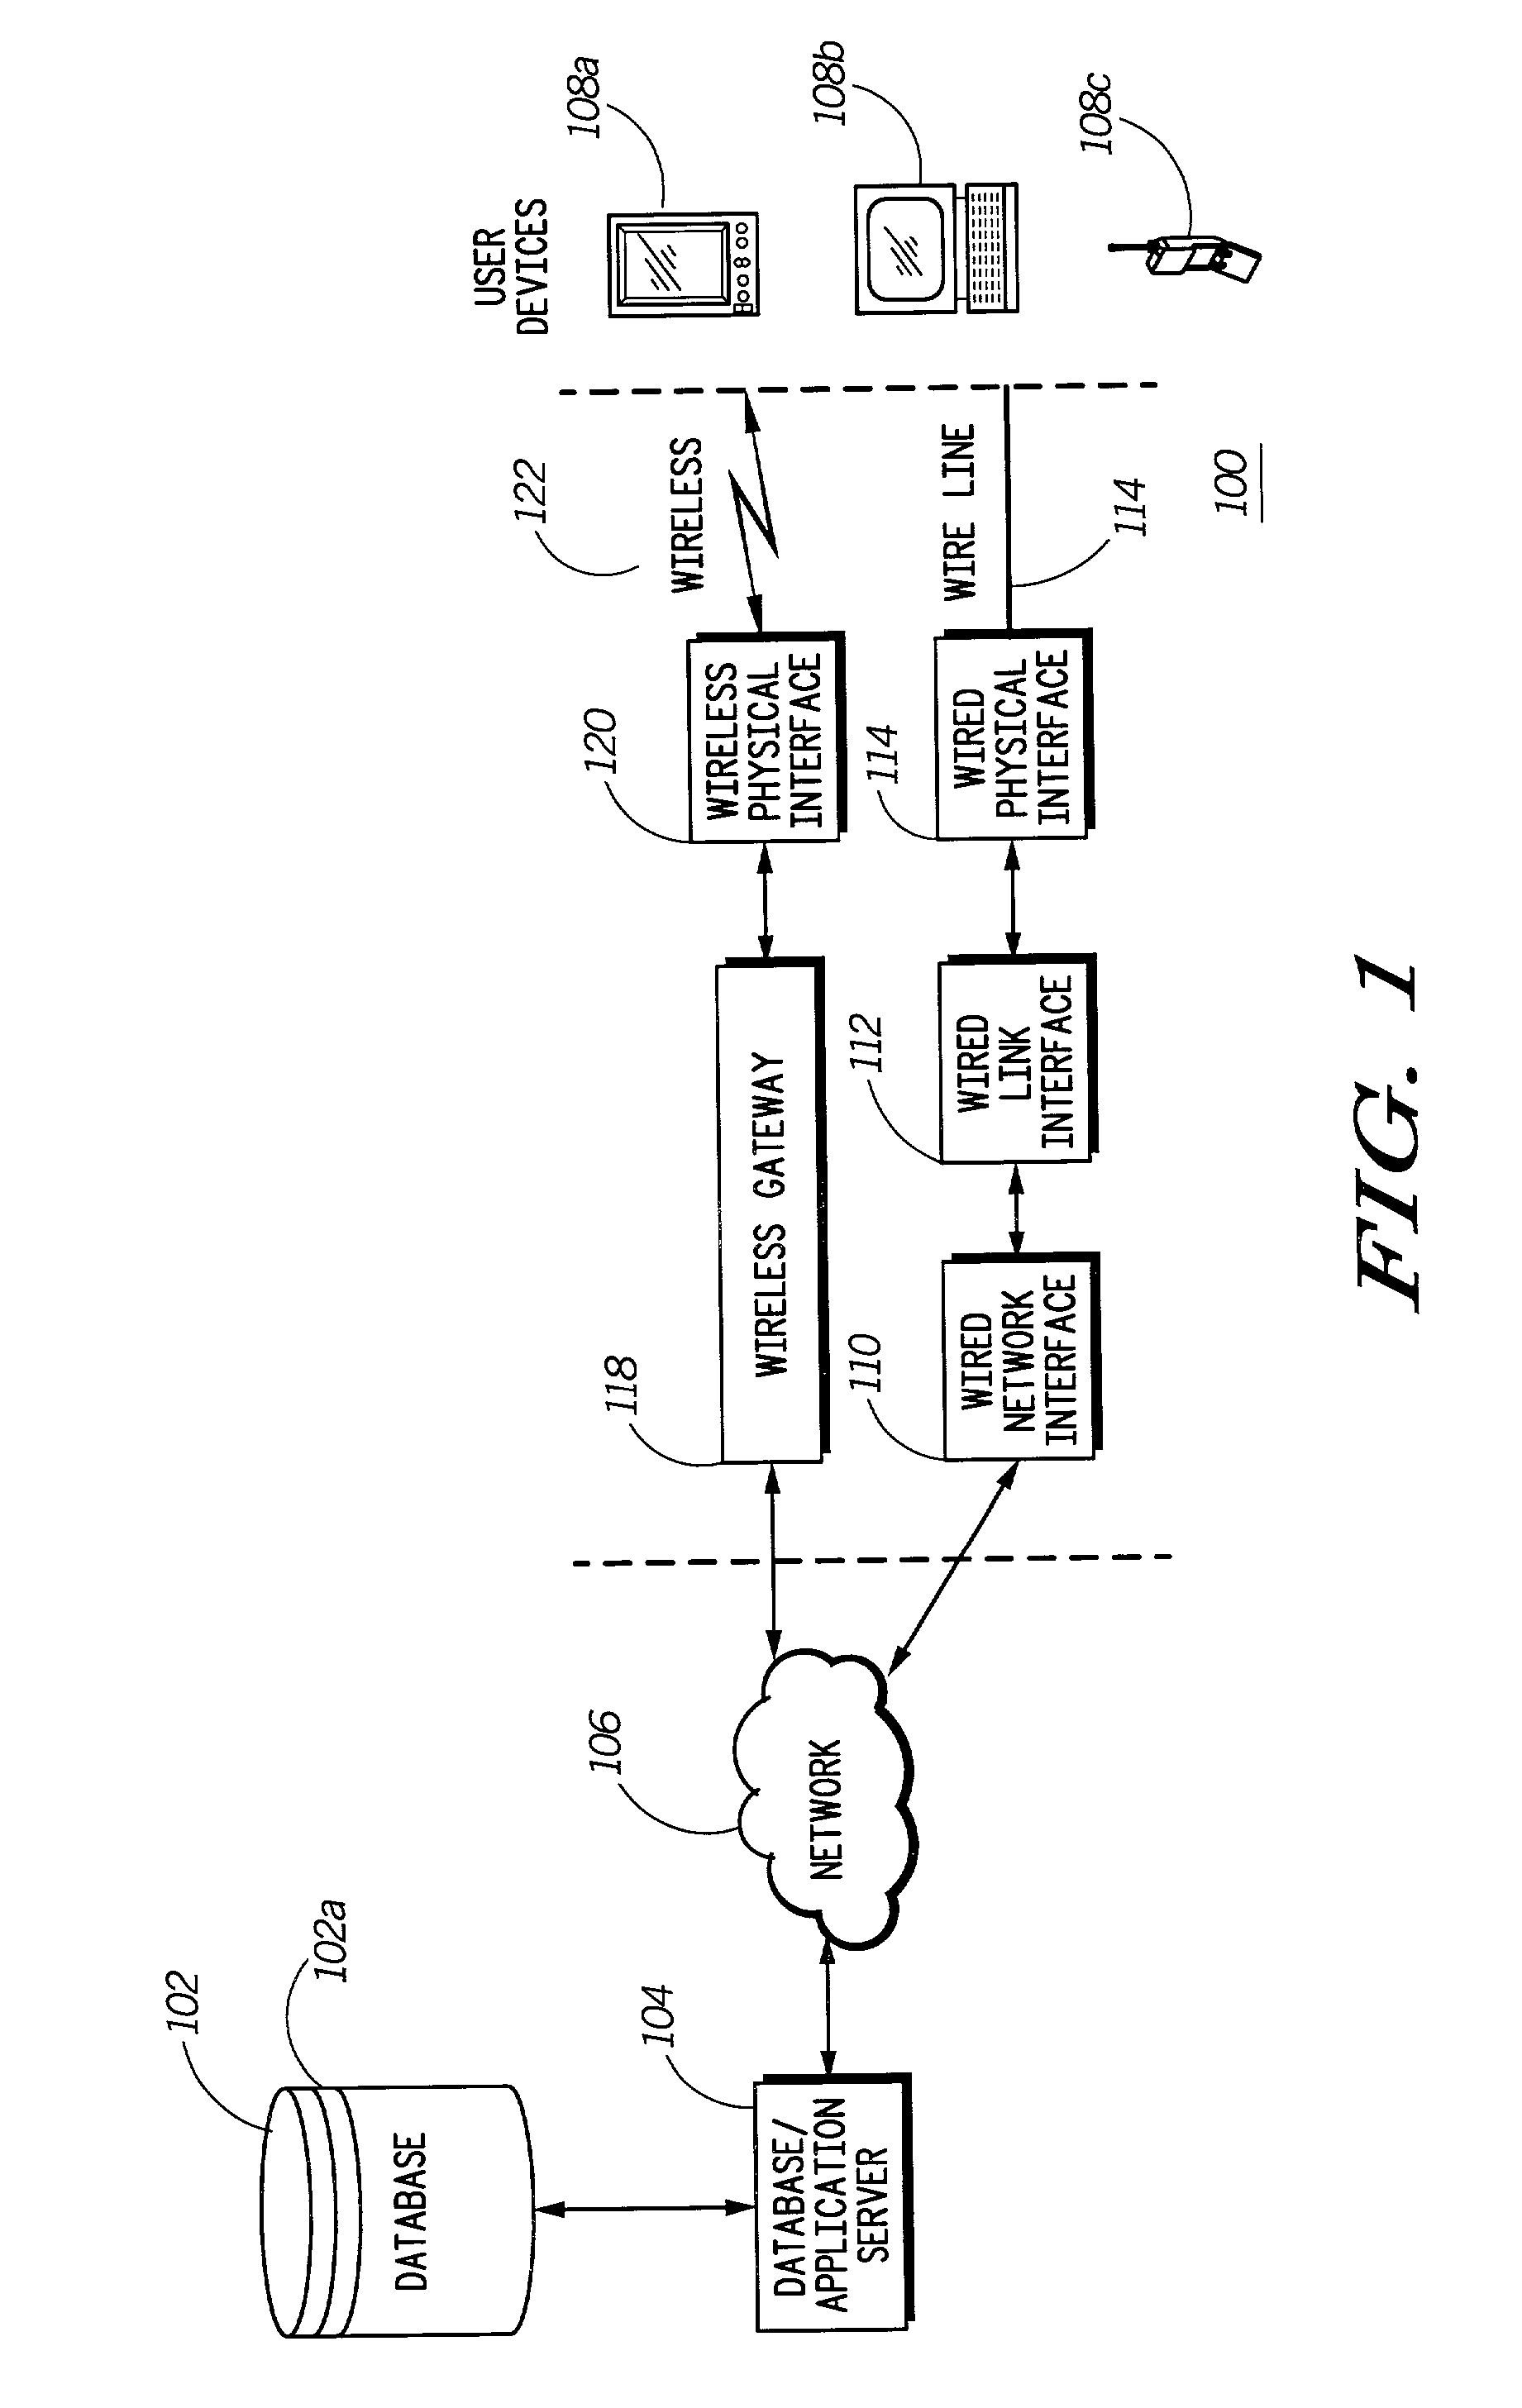 Communication device, system, method, and computer program product for sorting data based on proximity